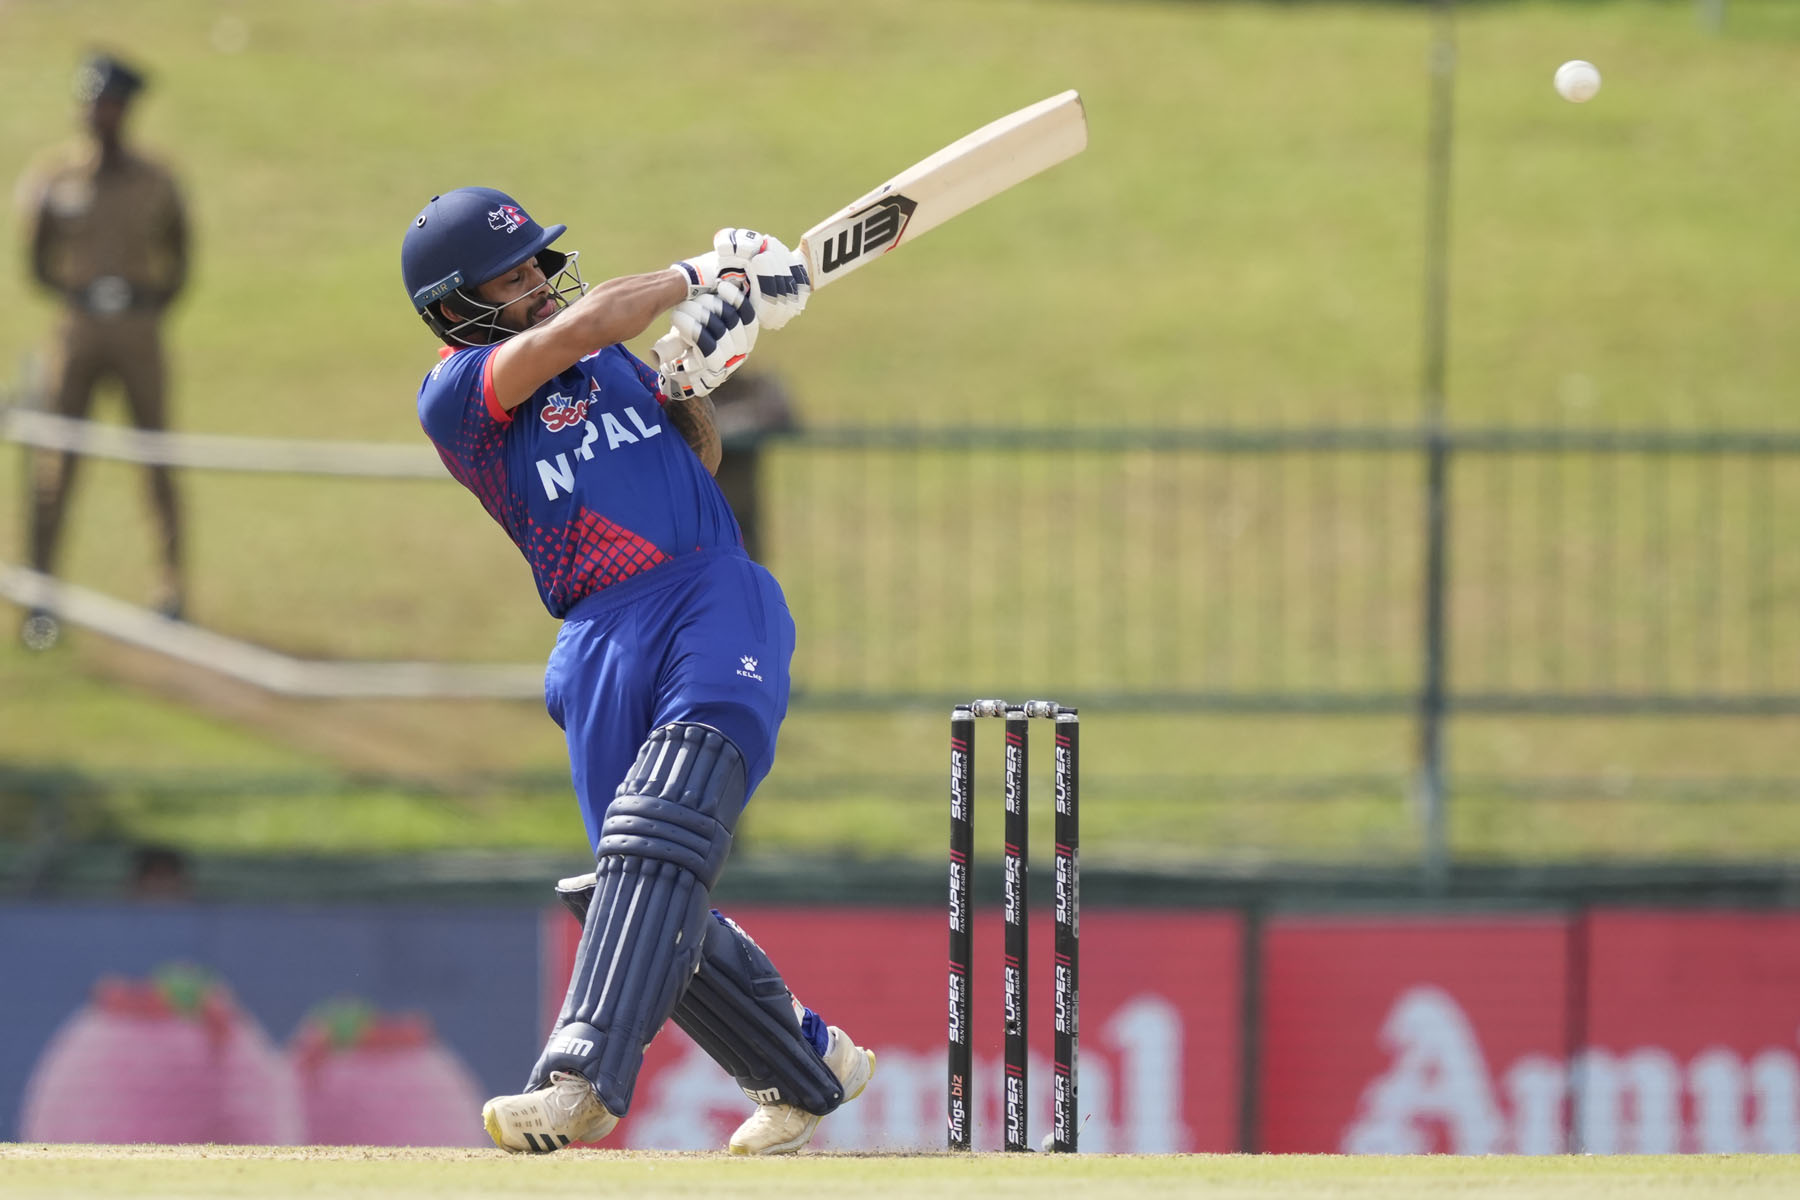 As Nepali cricket gains momentum, infrastructure lags behind